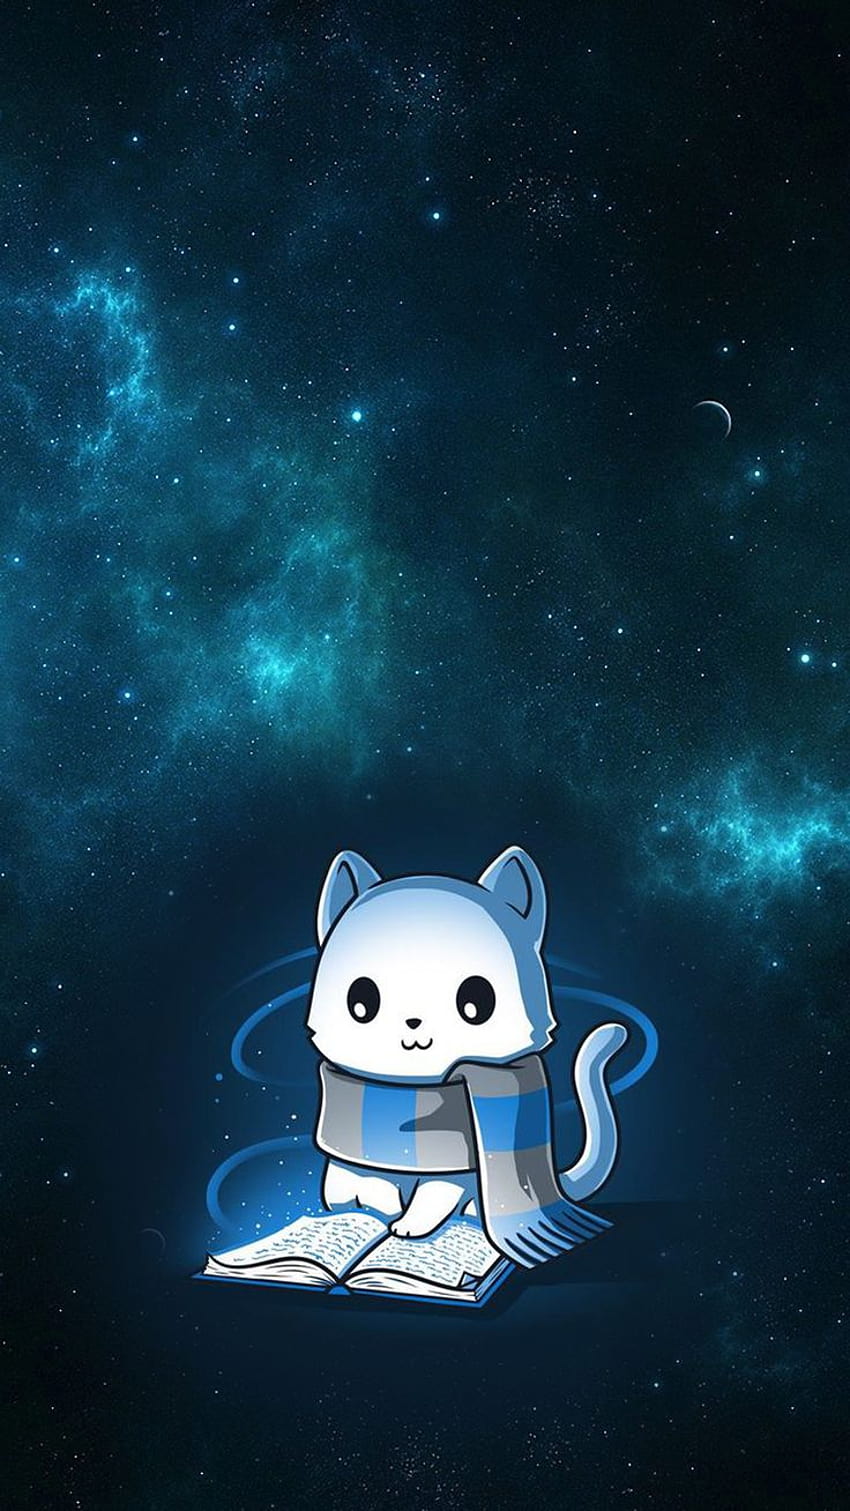 Ravenclaw cat space iphone backgrounds or ., cat harry potter HD phone wallpaper